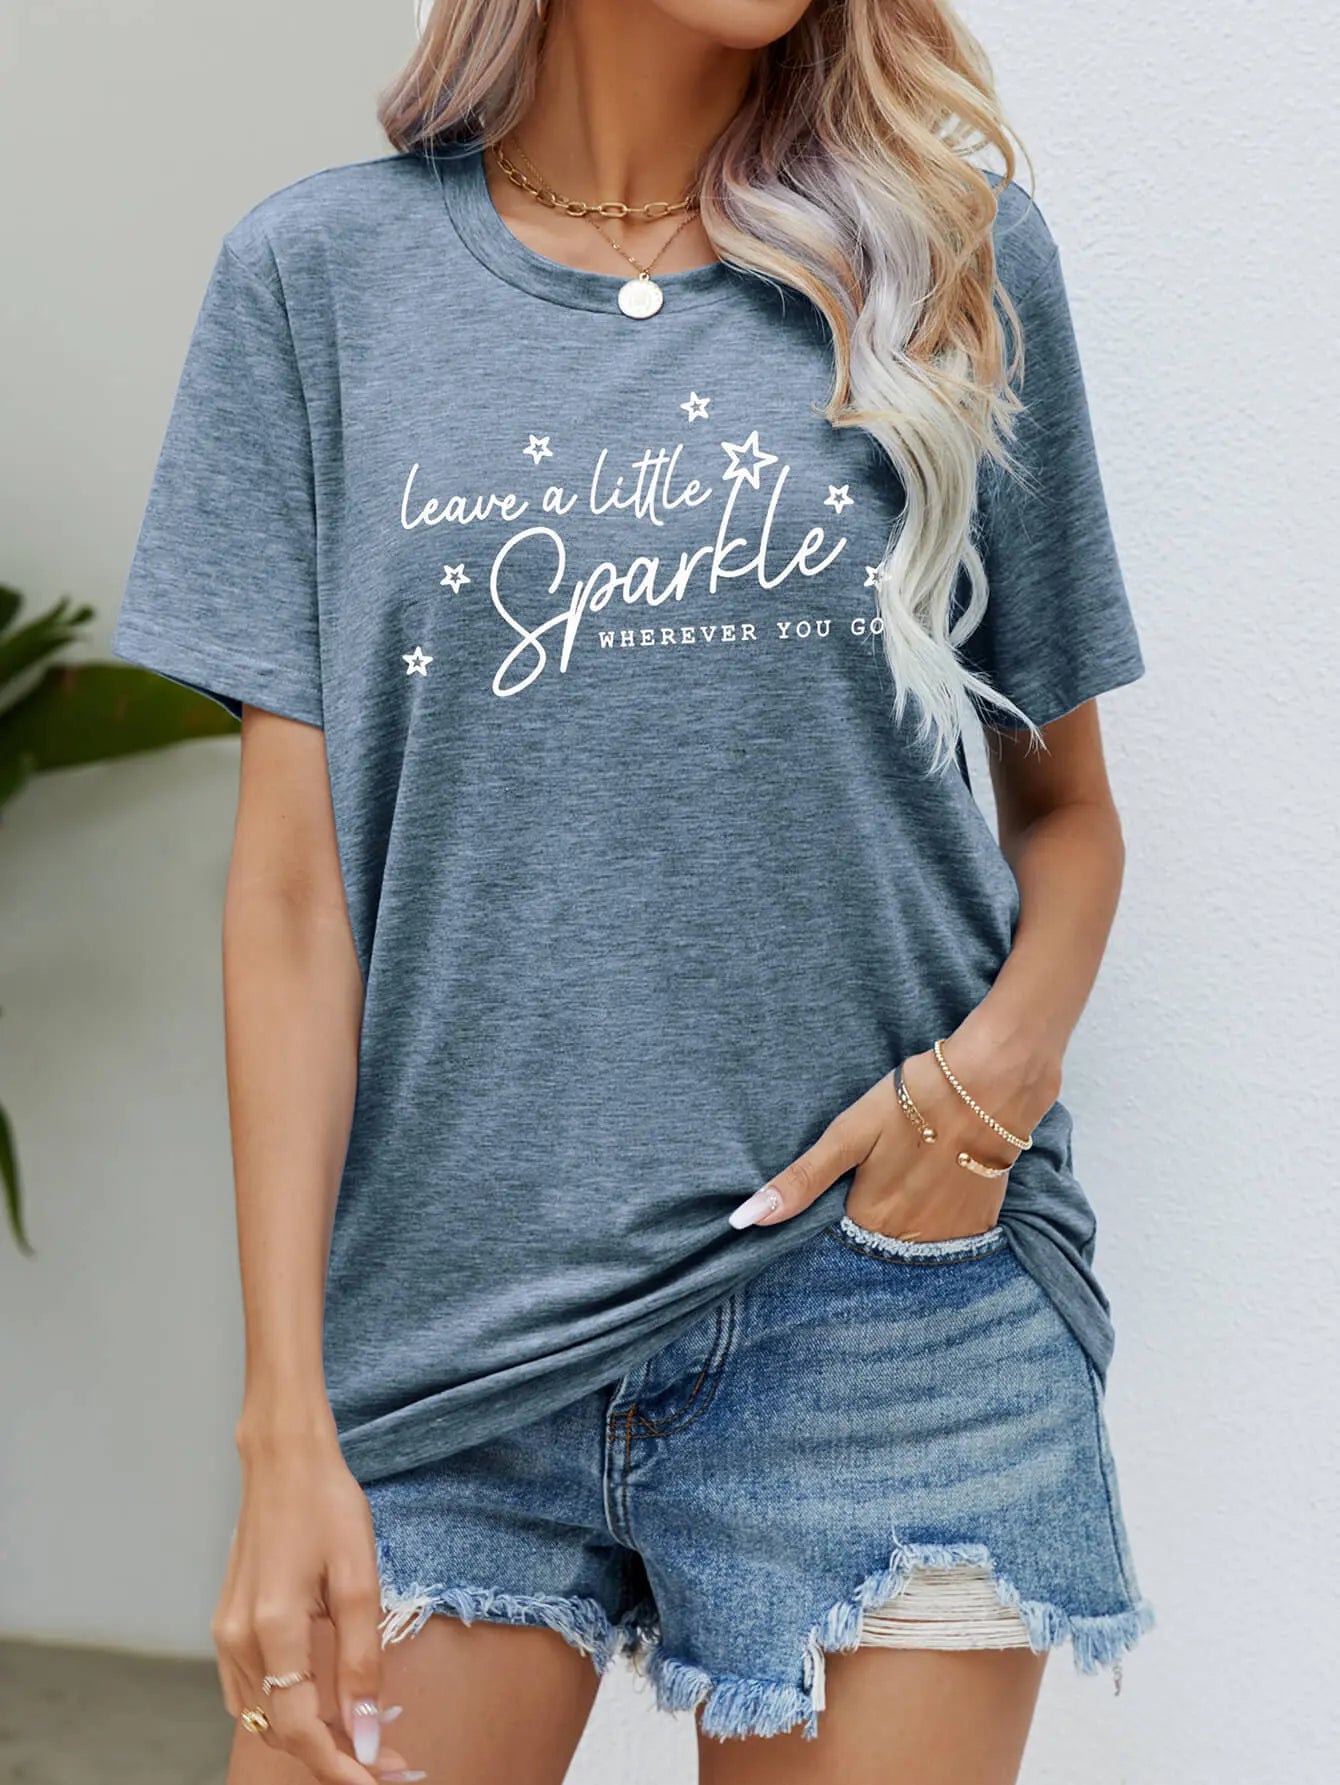 LEAVE A LITTLE SPARKLE WHEREVER YOU GO Tee Shirt - Image #10